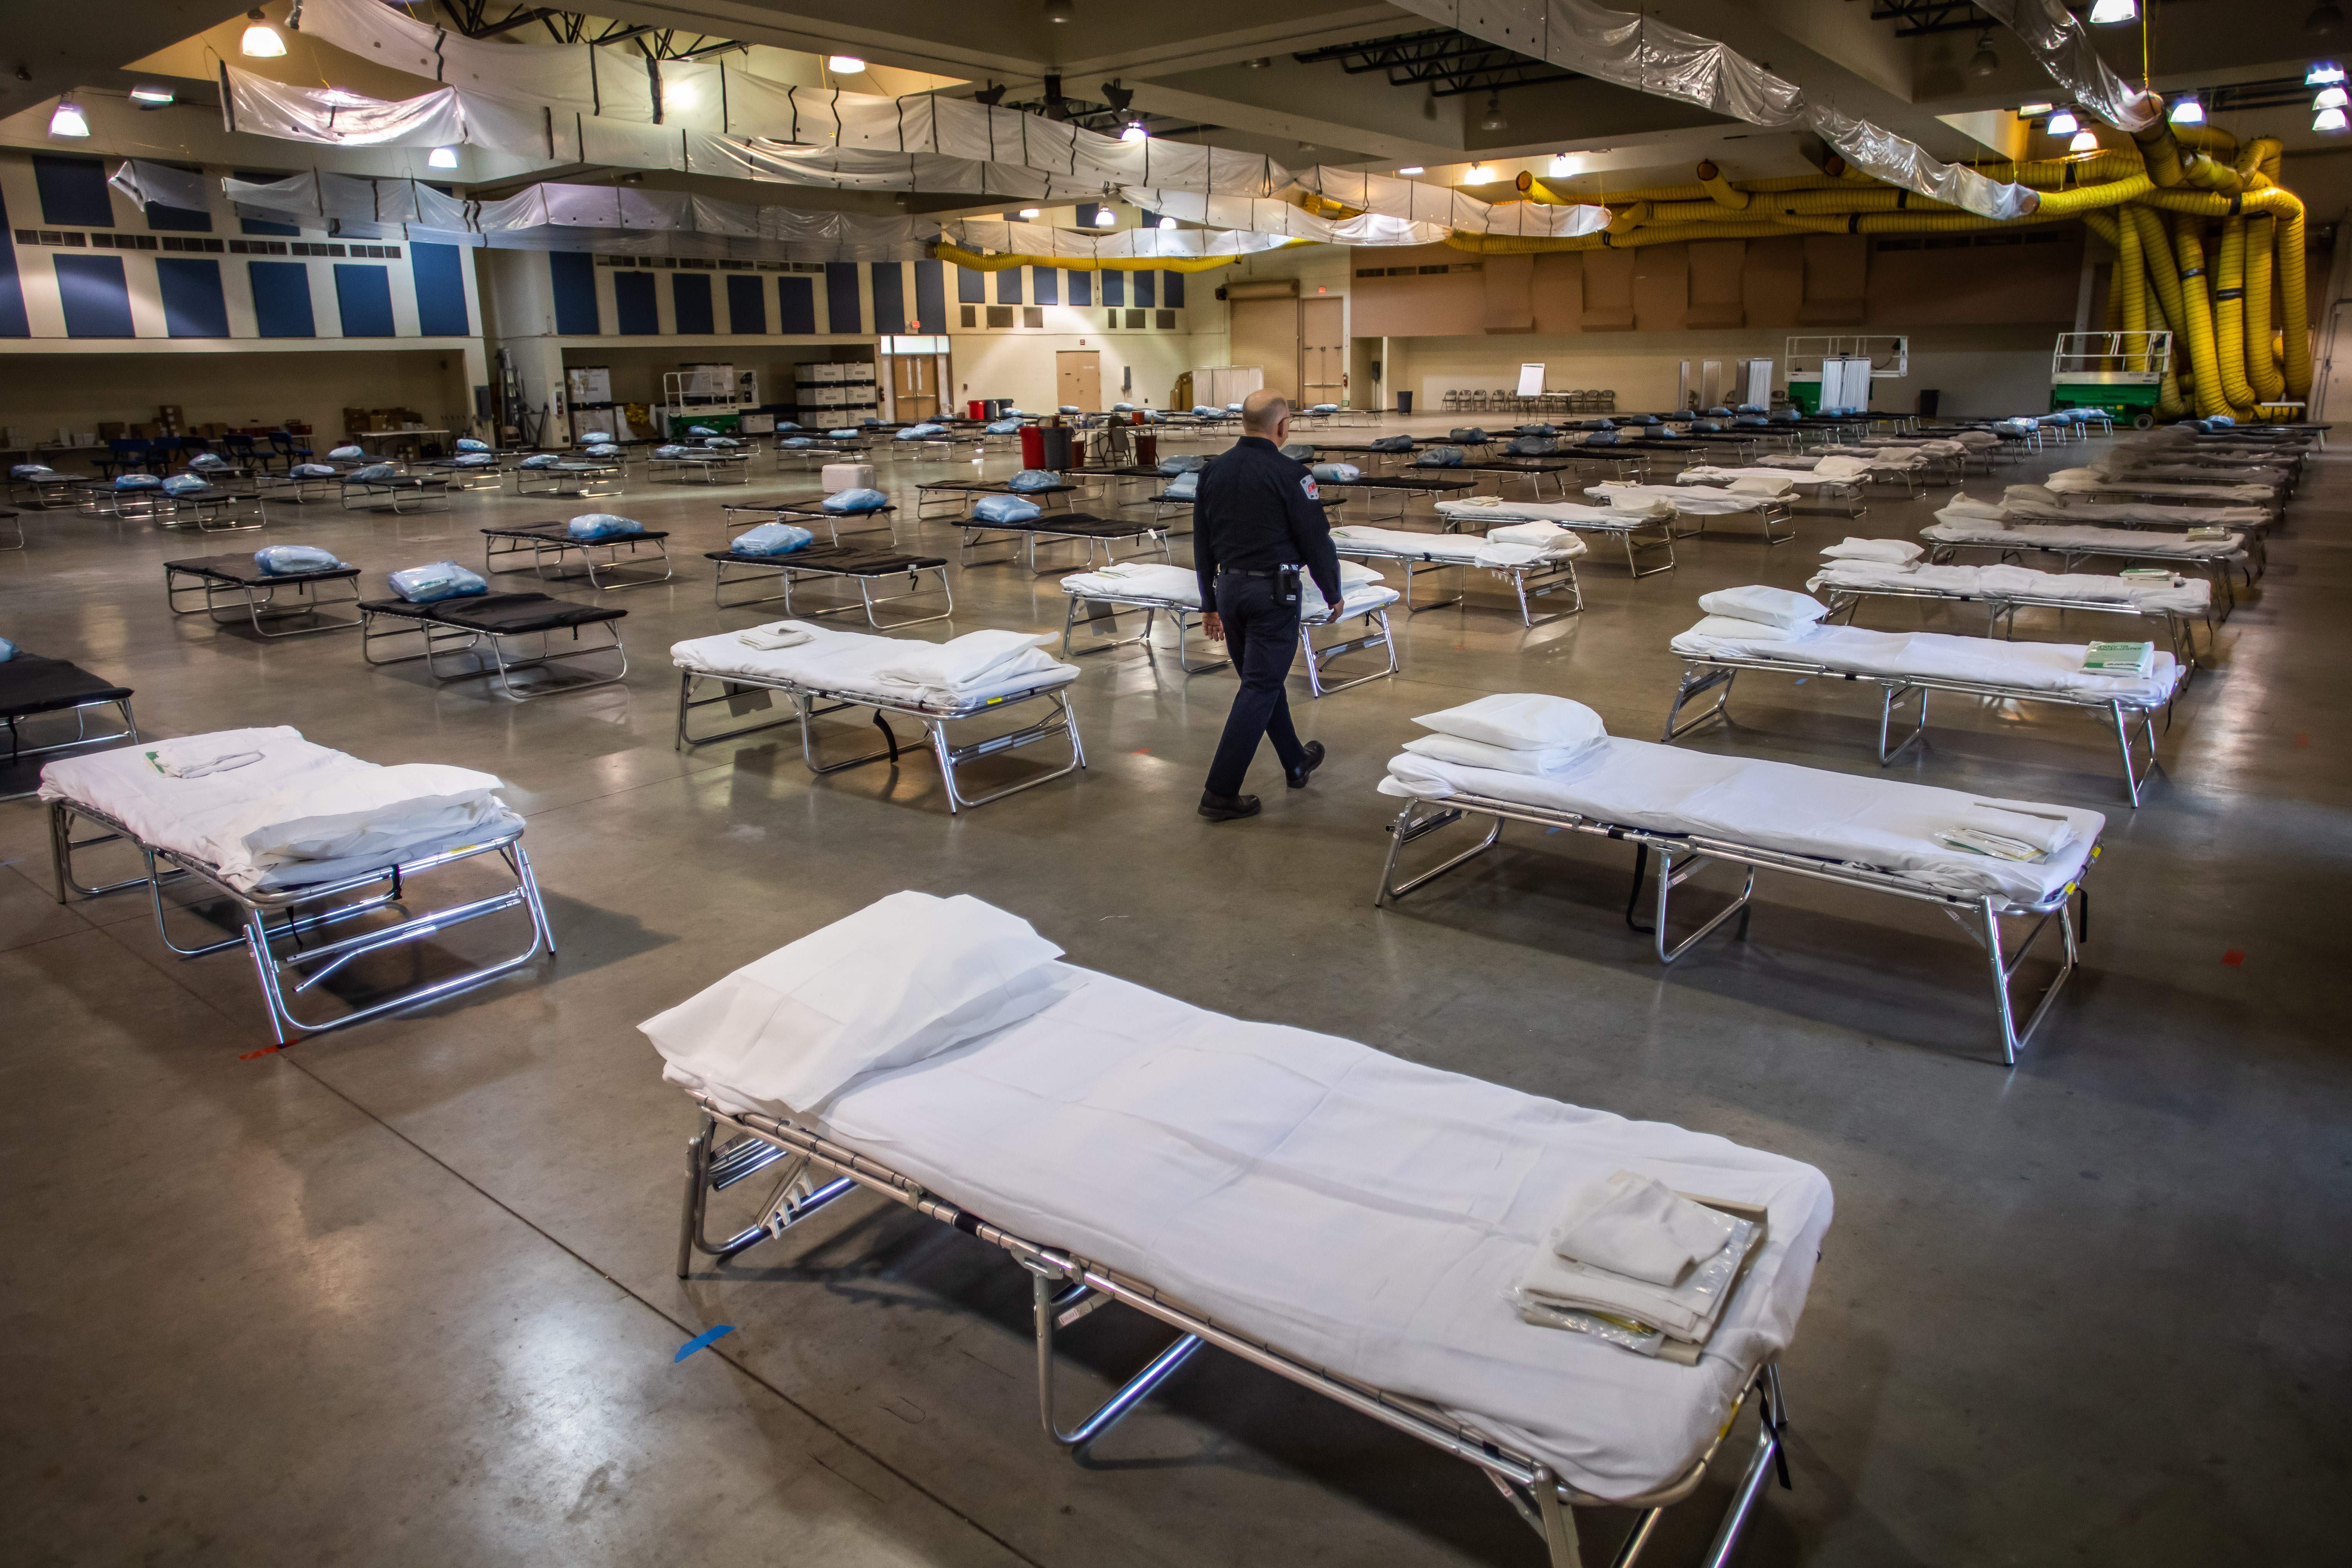 A temporary hospital which is been settled up by members of the California National Guard is seen in Indio, California on March 29, 2020. - The new field hospital with 125 beds will help ease the burden on the local hospital system amid the growing COVID-19 Coronavirus crises. (Photo by Apu Gomes/AFP via Getty Images)